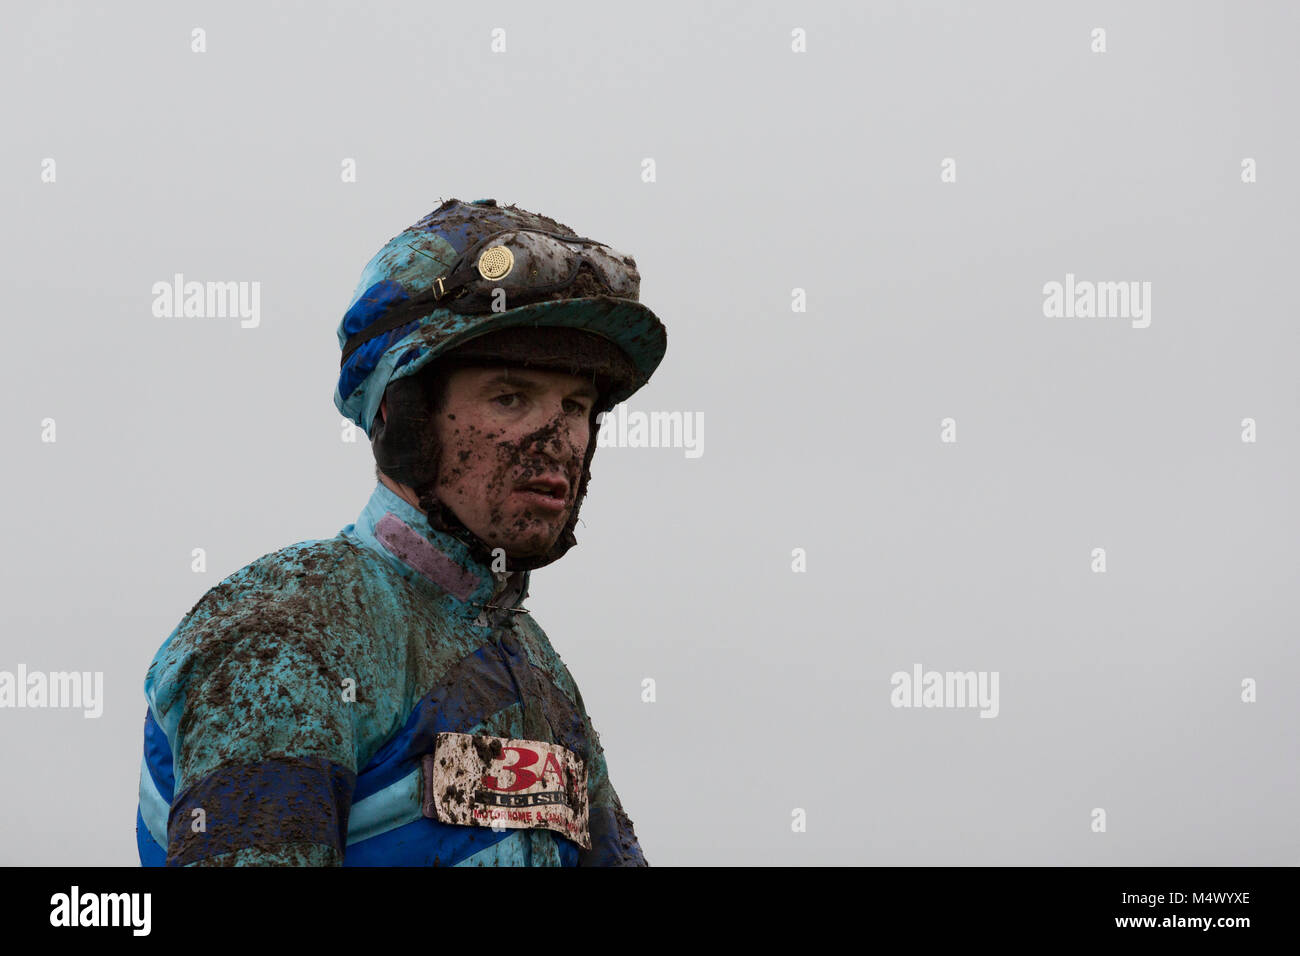 Ffos Las Racecourse, Trimsaran, Wales, UK. 18th Feb, 2018. Jockey Robert Dunne after finishing second on Lac Sacre in the Professional Security Management Ltd Handicap Chase Credit: Gruffydd Thomas/Alamy Live News Stock Photo